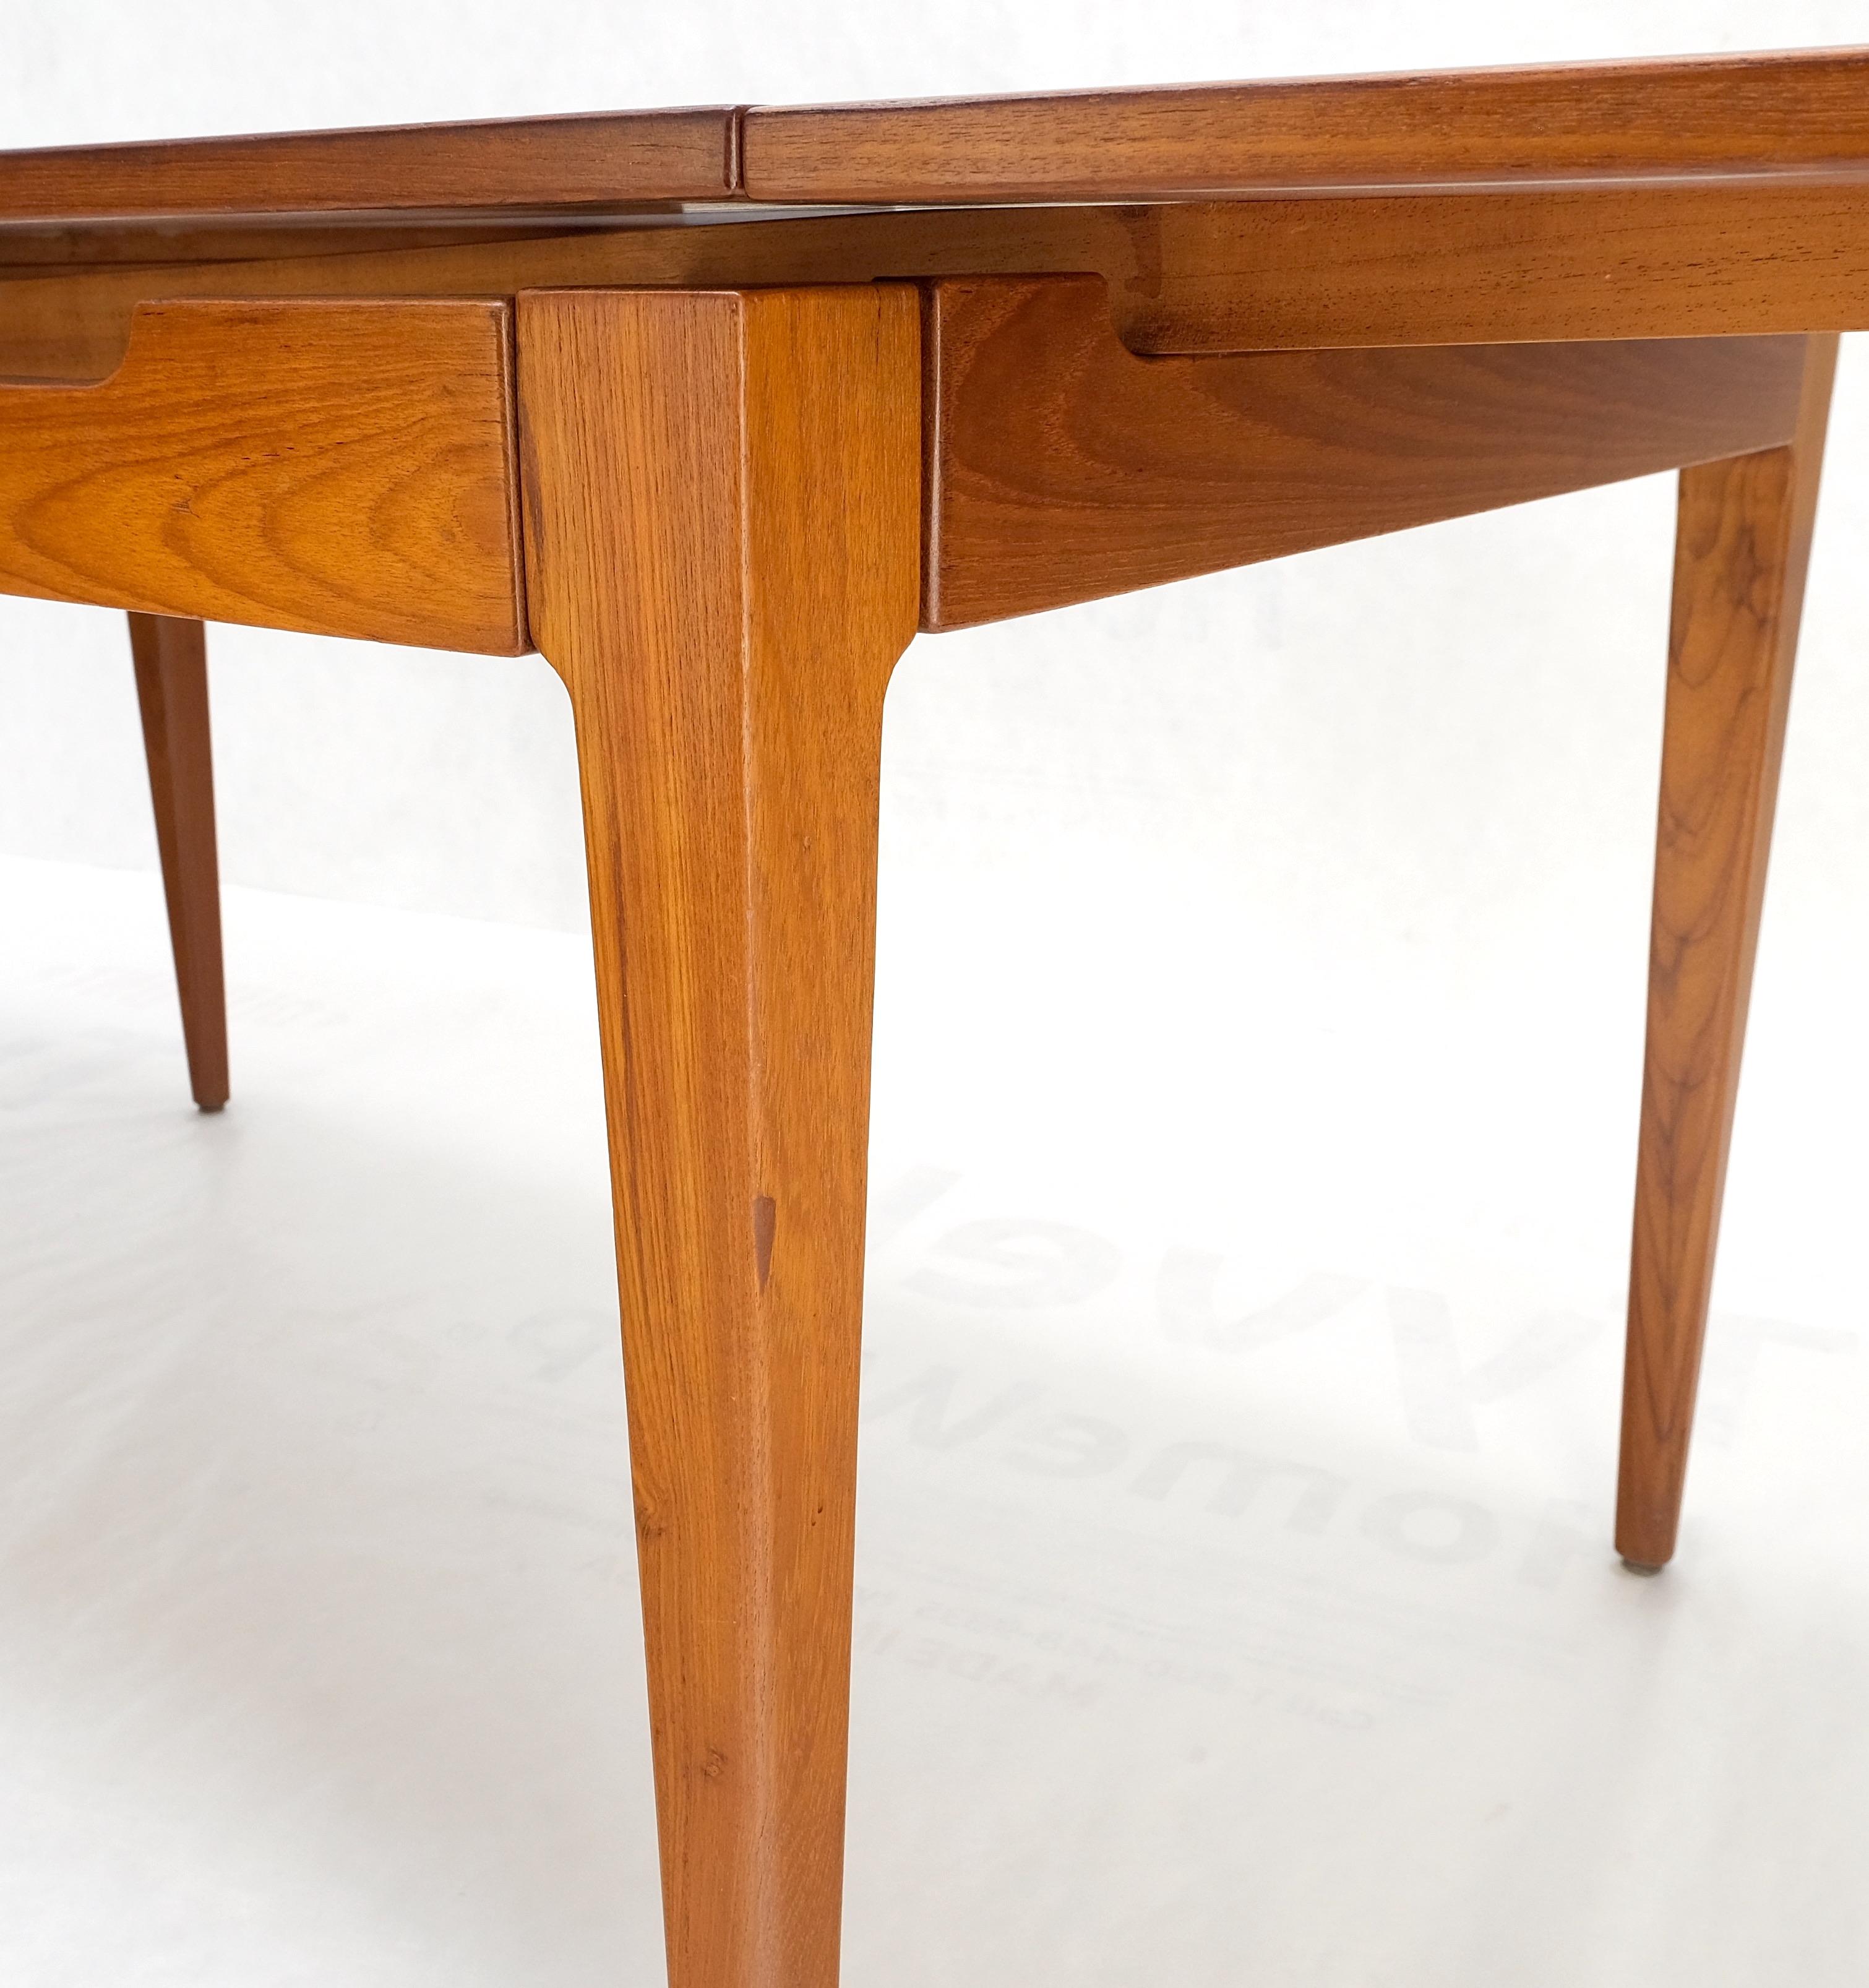 20th Century Danish Mid-Century Modern Teak Refectory Dining Table Two Leafs Mint! For Sale